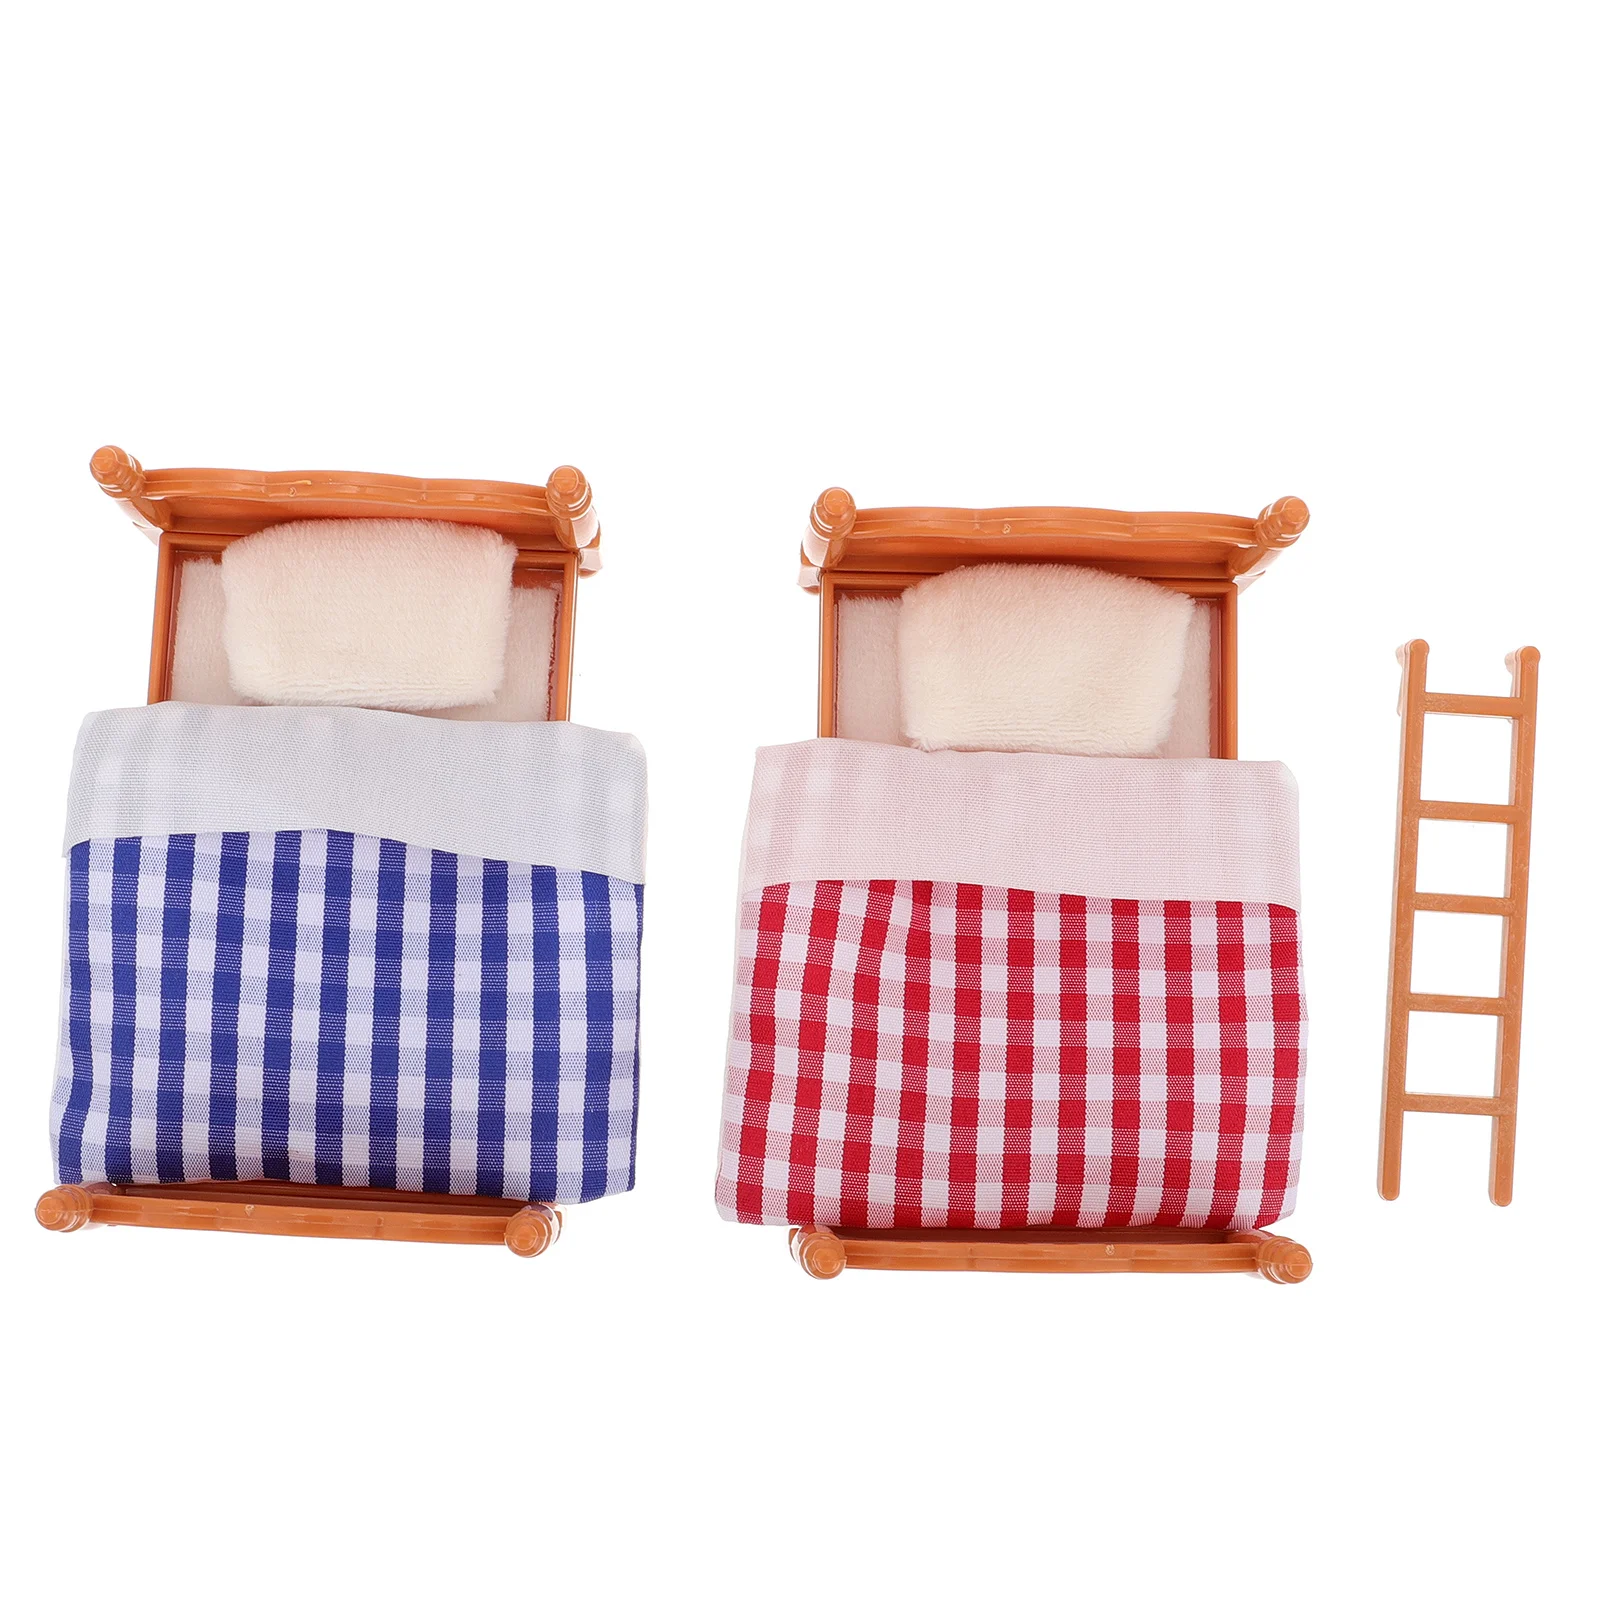 

Bed Bunk House Miniature Mini Furniture Bedstoy Model Supplies Bedroom Scene Simulation Accessories Furnishingsdecorshowcase